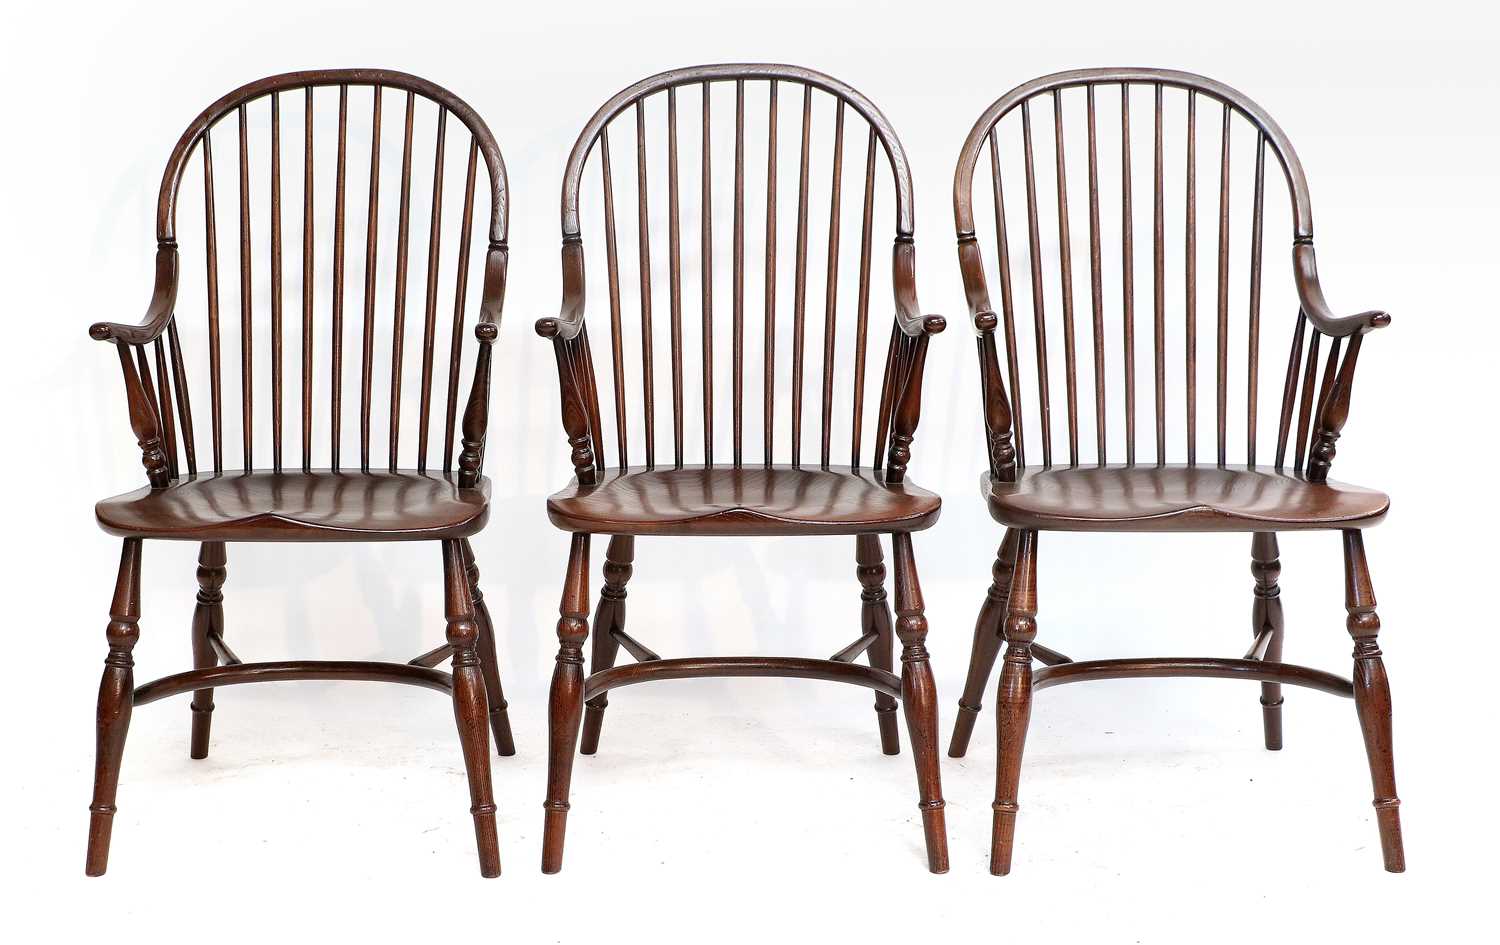 A Set of Six Stained Oak/Ash Windsor-Style Armchairs, of recent date, each with spindle back - Image 2 of 3